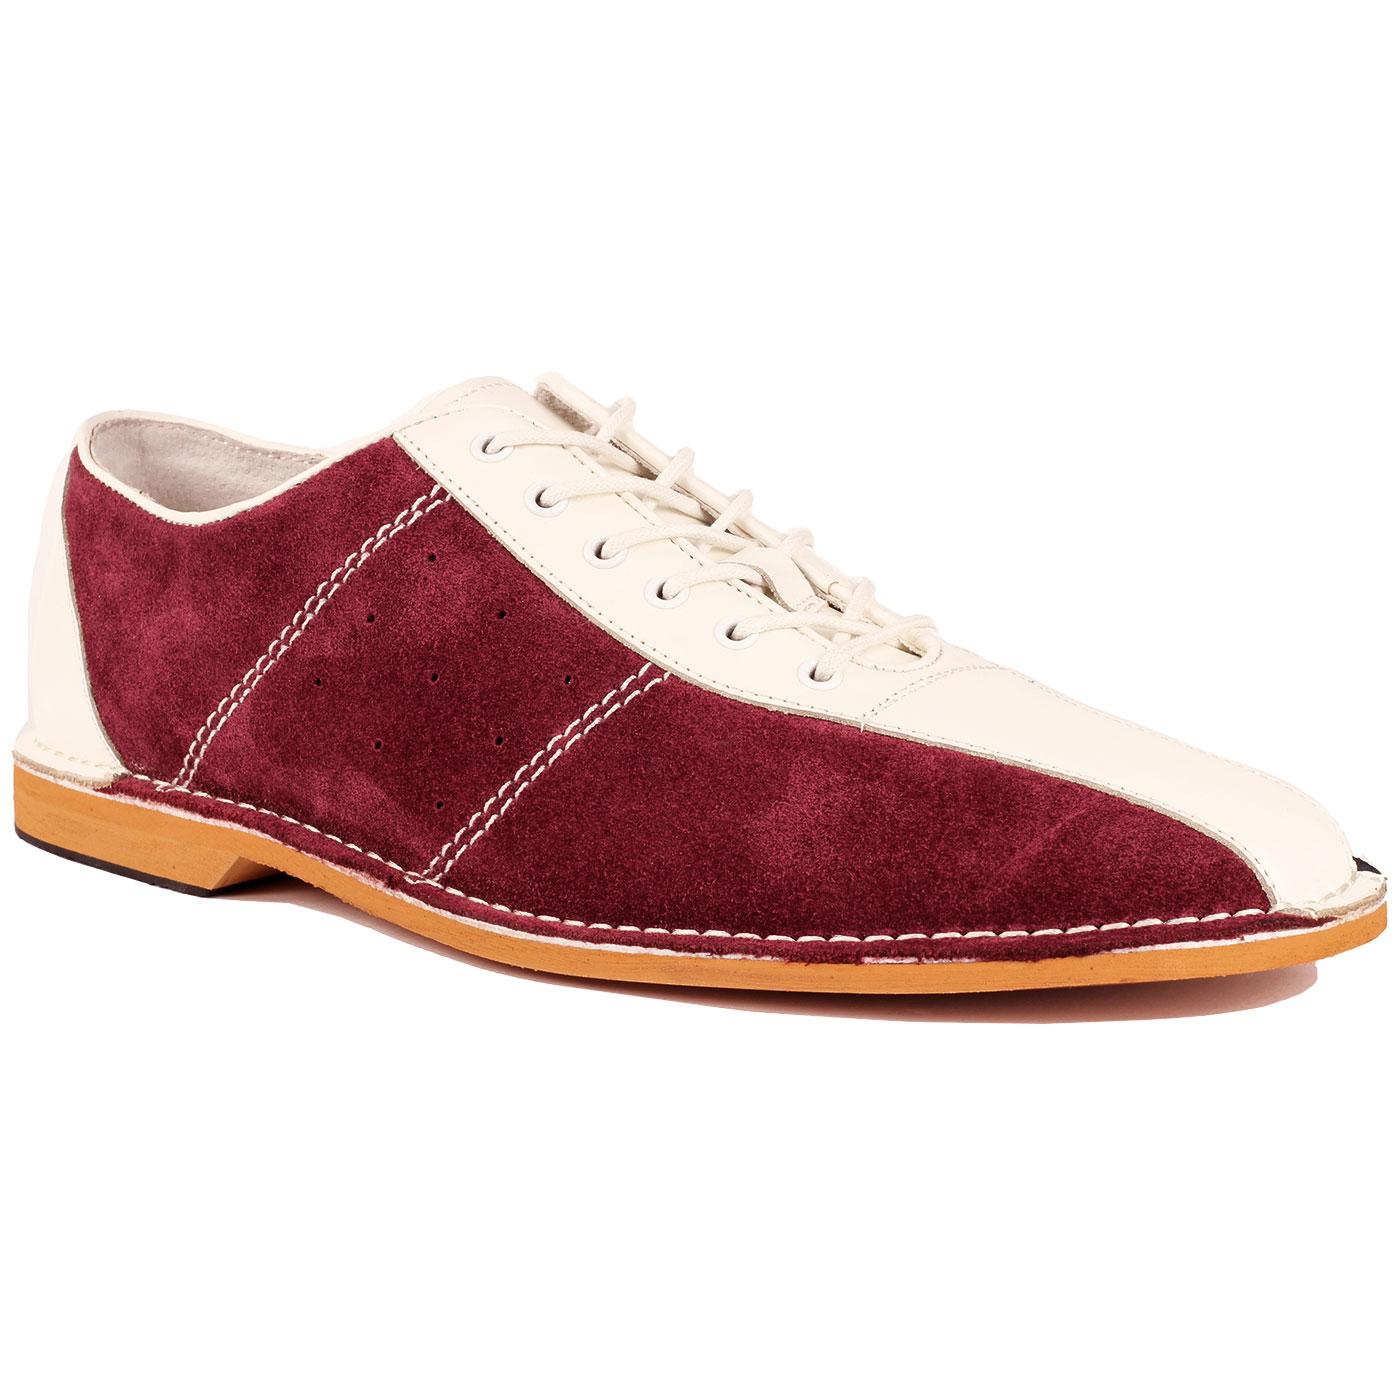 Madcap England All Up Men's Mod Northern Soul Bowling Shoes in Wine/White/Navy